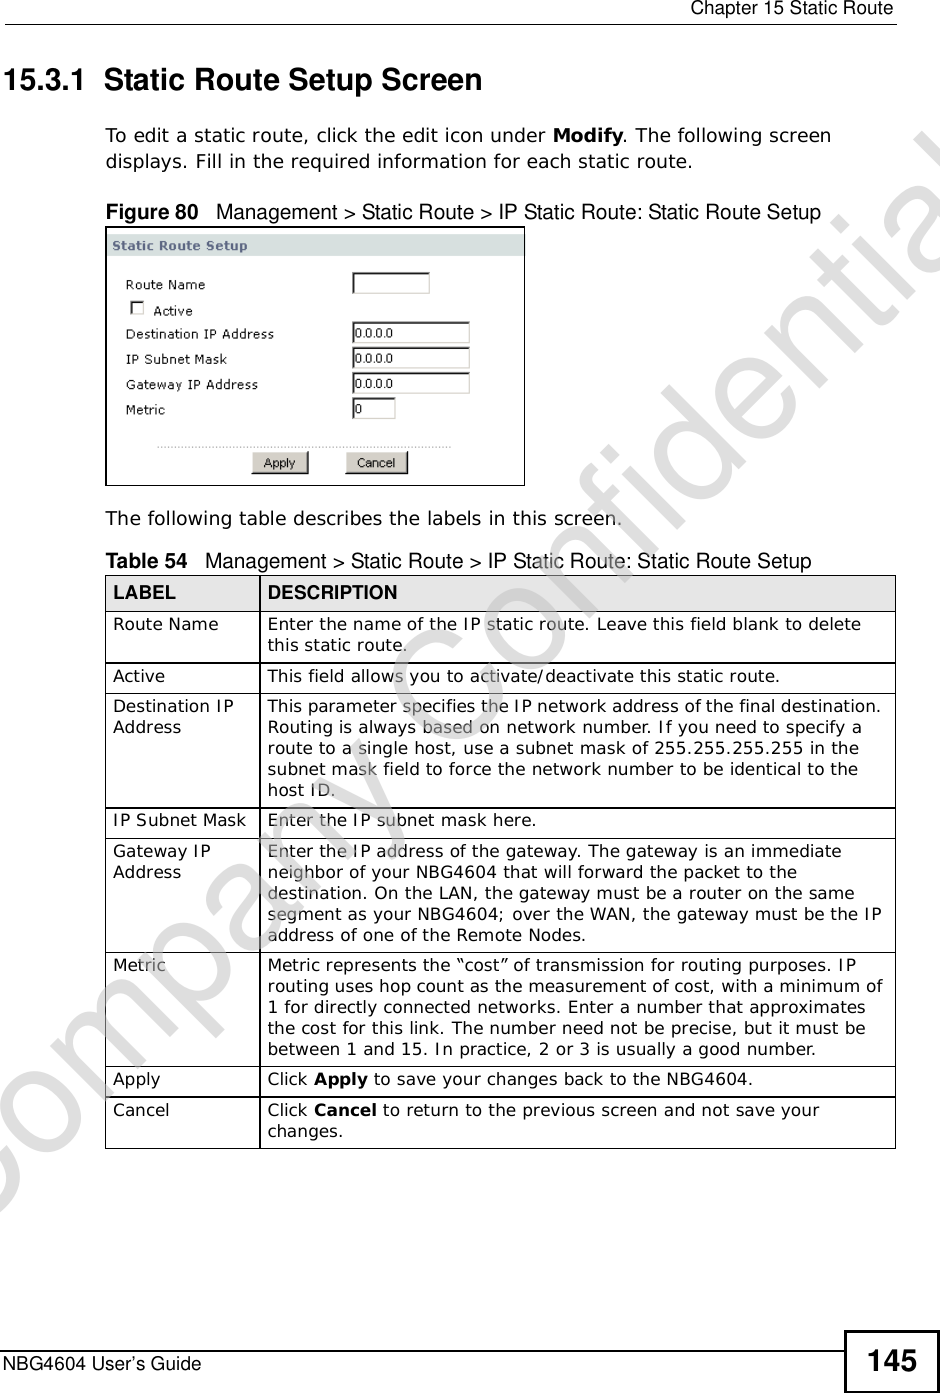  Chapter 15Static RouteNBG4604 User’s Guide 14515.3.1  Static Route Setup Screen   To edit a static route, click the edit icon under Modify. The following screen displays. Fill in the required information for each static route.Figure 80   Management &gt; Static Route &gt; IP Static Route: Static Route SetupThe following table describes the labels in this screen.Table 54   Management &gt; Static Route &gt; IP Static Route: Static Route SetupLABEL DESCRIPTIONRoute Name Enter the name of the IP static route. Leave this field blank to delete this static route.Active This field allows you to activate/deactivate this static route.Destination IP Address This parameter specifies the IP network address of the final destination. Routing is always based on network number. If you need to specify a route to a single host, use a subnet mask of 255.255.255.255 in the subnet mask field to force the network number to be identical to the host ID.IP Subnet Mask  Enter the IP subnet mask here.Gateway IP Address Enter the IP address of the gateway. The gateway is an immediate neighbor of your NBG4604 that will forward the packet to the destination. On the LAN, the gateway must be a router on the same segment as your NBG4604; over the WAN, the gateway must be the IP address of one of the Remote Nodes.Metric Metric represents the “cost” of transmission for routing purposes. IP routing uses hop count as the measurement of cost, with a minimum of 1 for directly connected networks. Enter a number that approximates the cost for this link. The number need not be precise, but it must be between 1 and 15. In practice, 2 or 3 is usually a good number. Apply Click Apply to save your changes back to the NBG4604.Cancel Click Cancel to return to the previous screen and not save your changes.Company Confidential